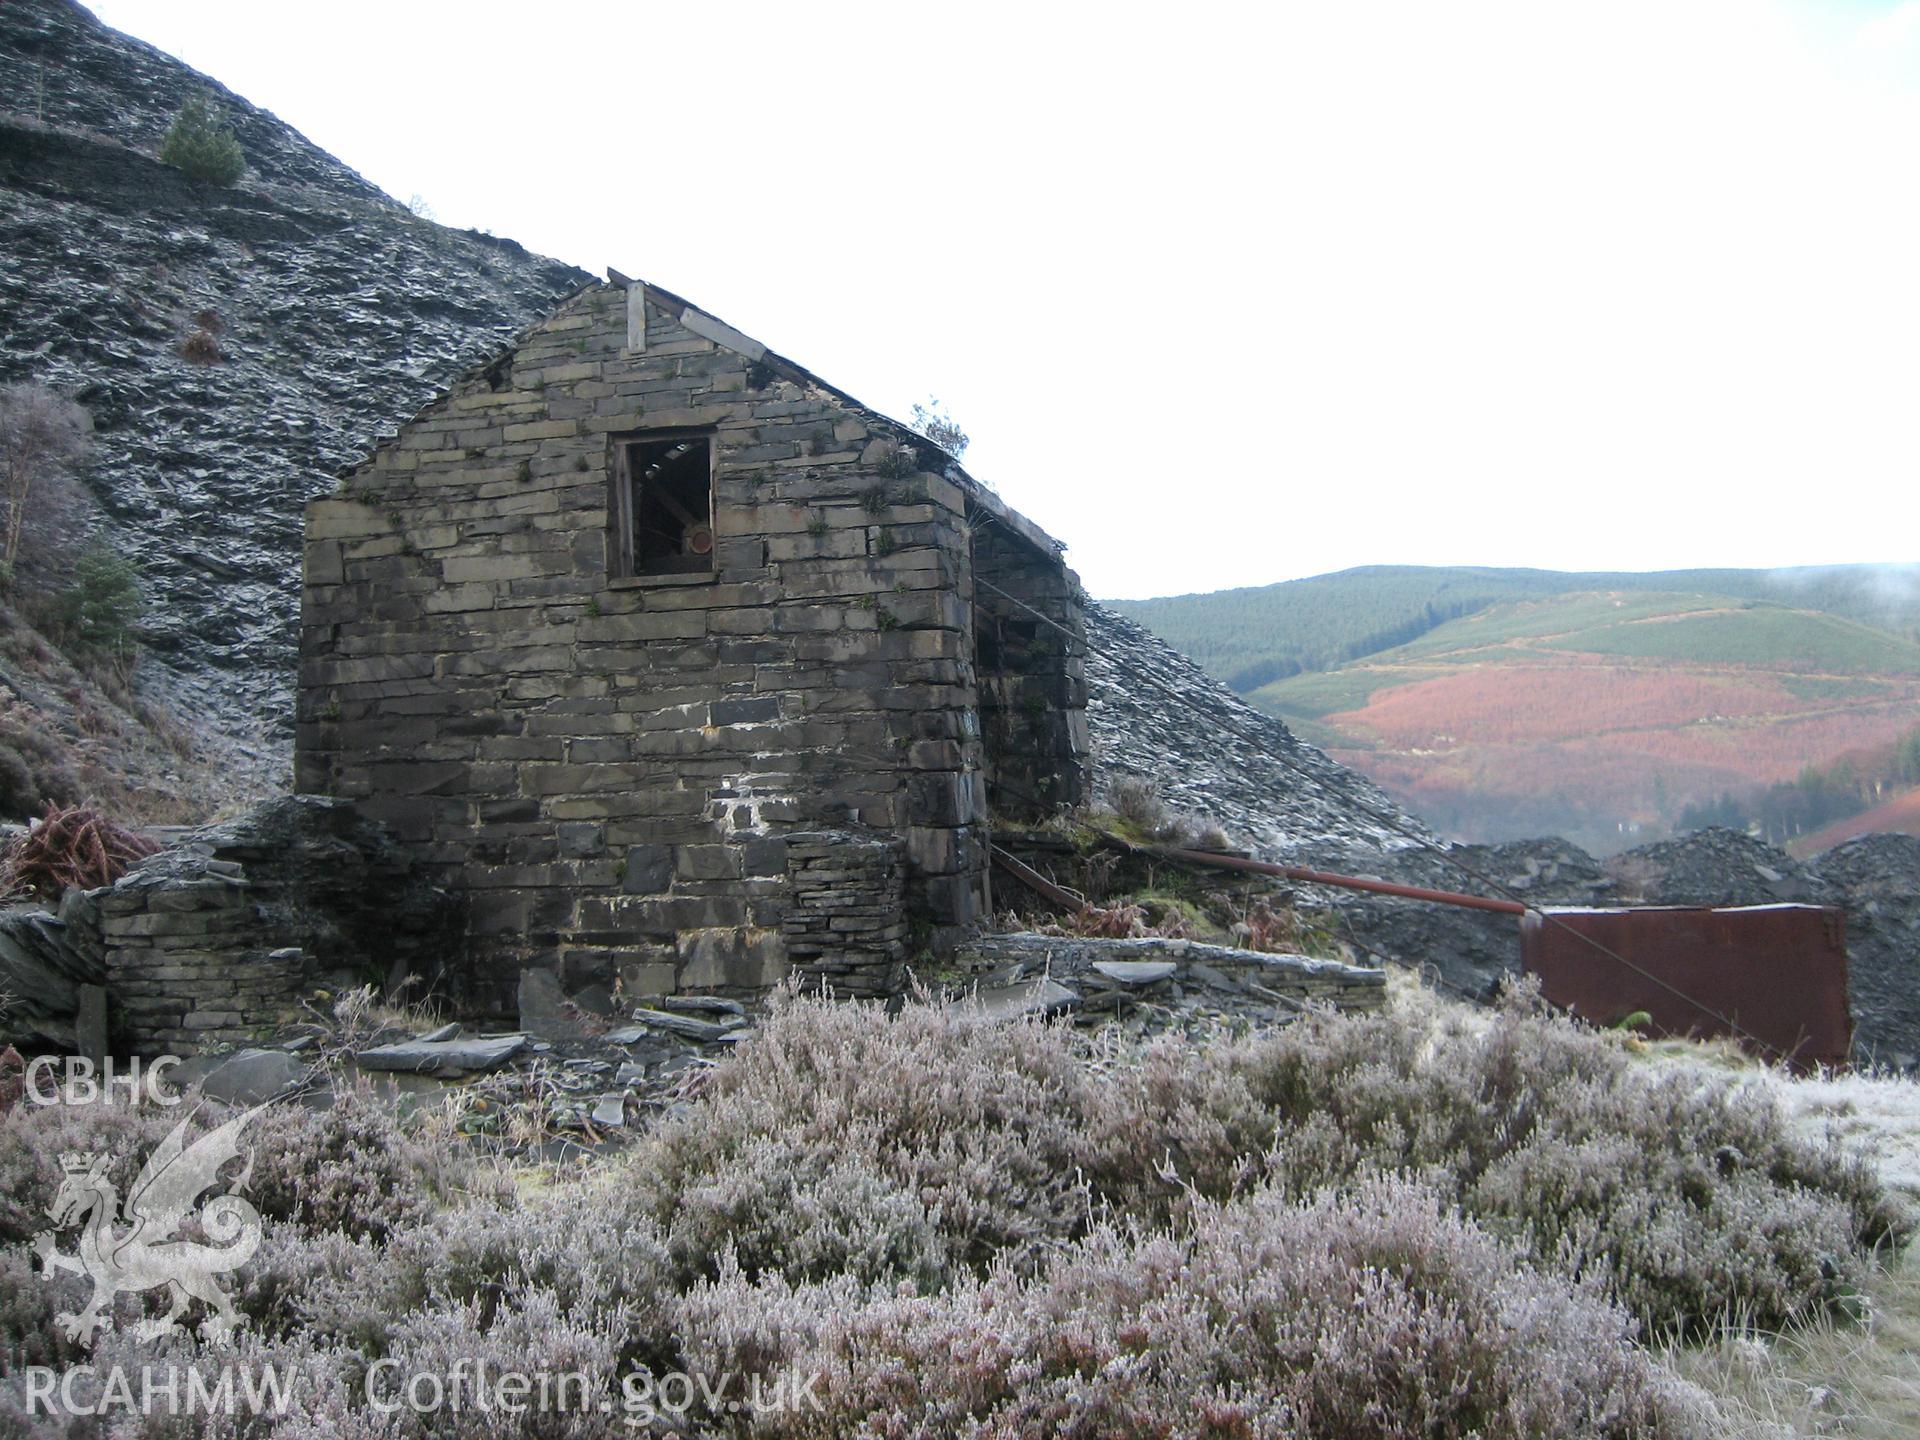 Drum house of the water-balance incline and the remains of the brake man's cabin, taken from the east.